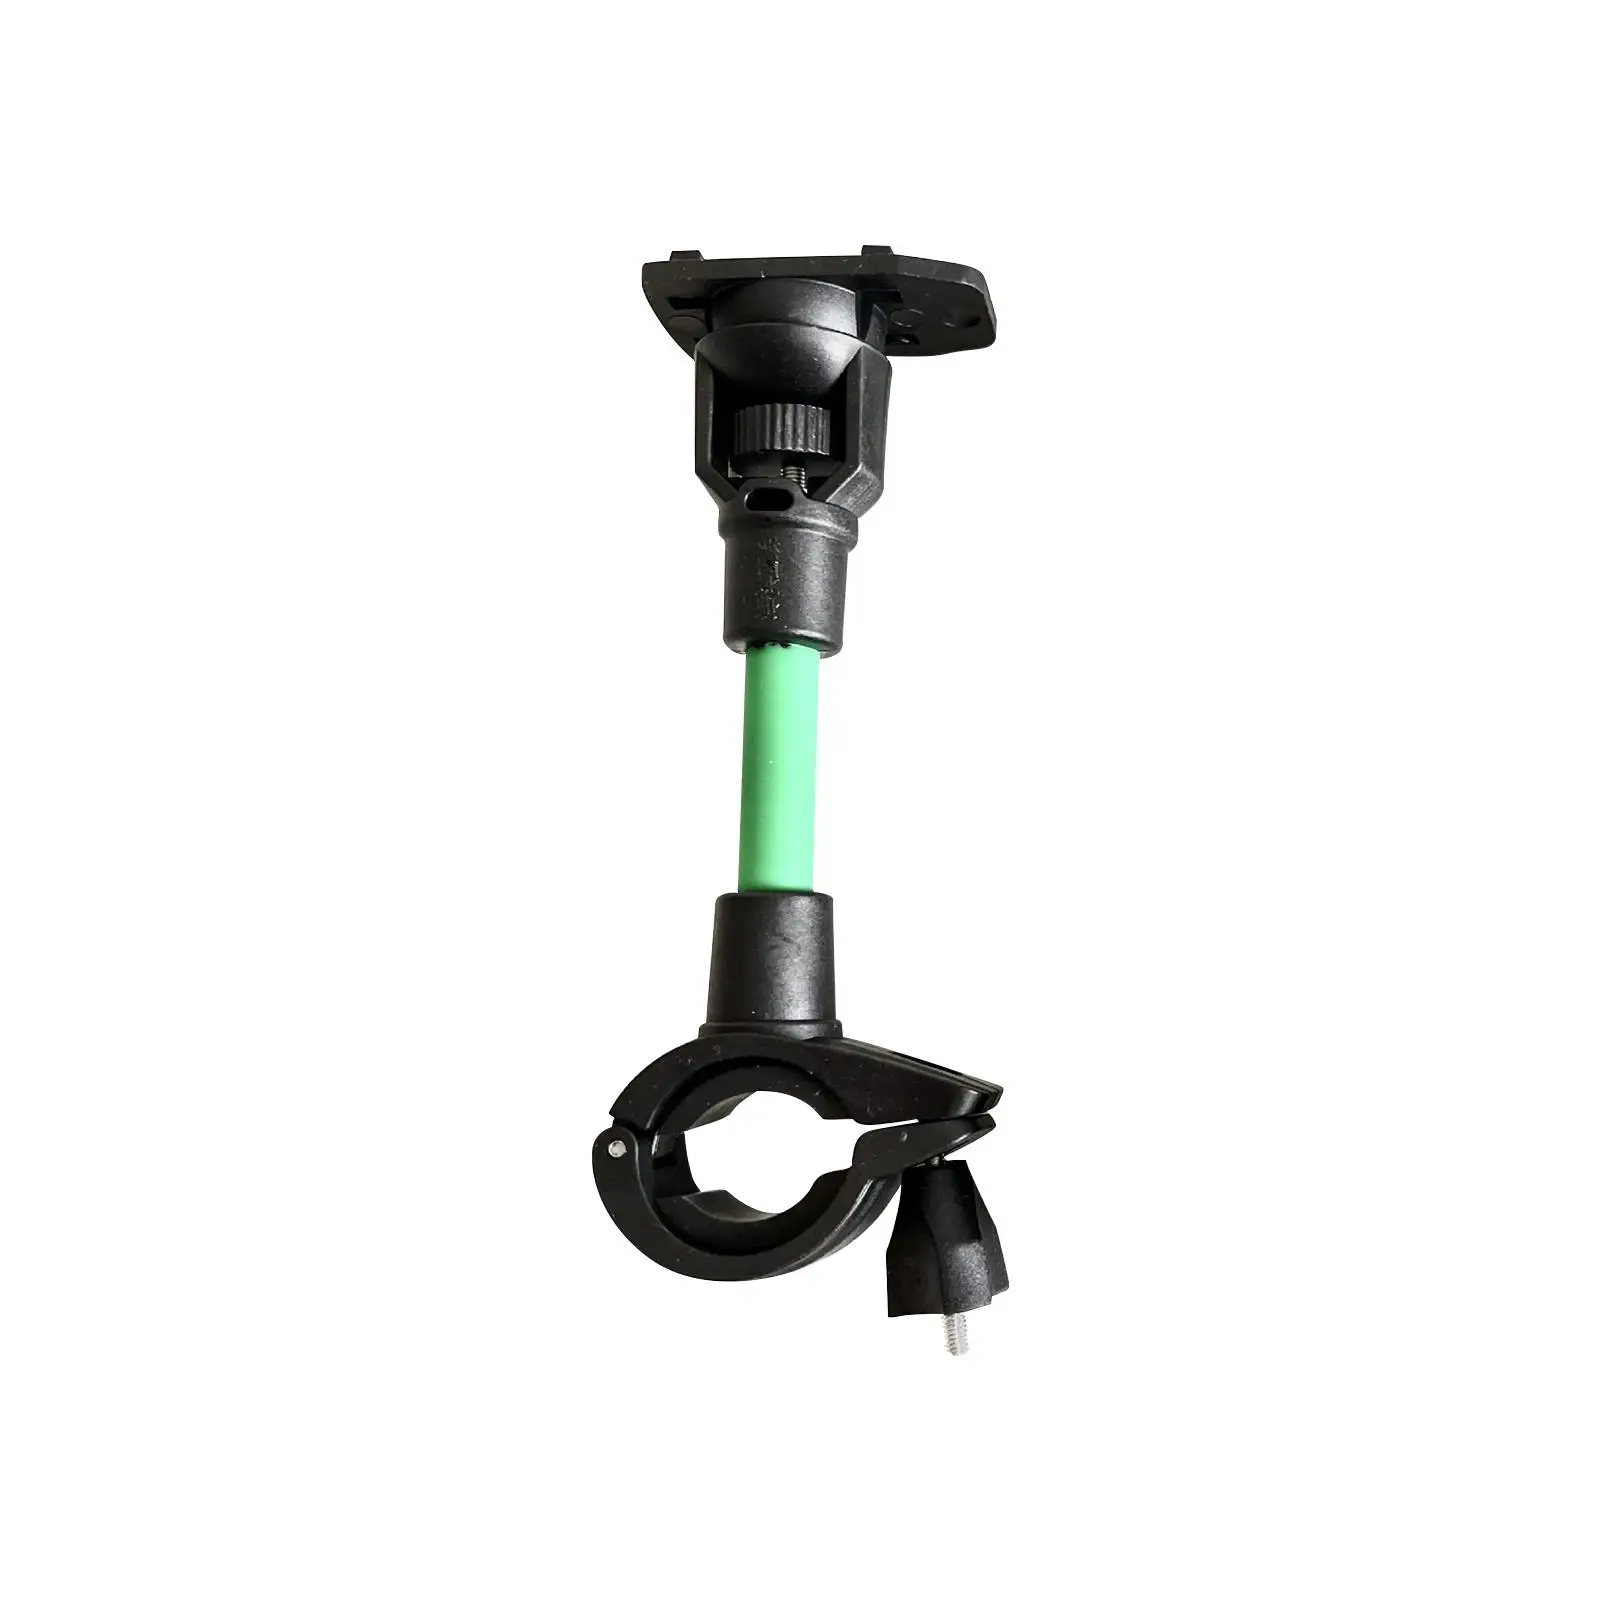 Fish Finders Clamp Mount for Fishing Pole Lightweight Compact Underwater Fishing